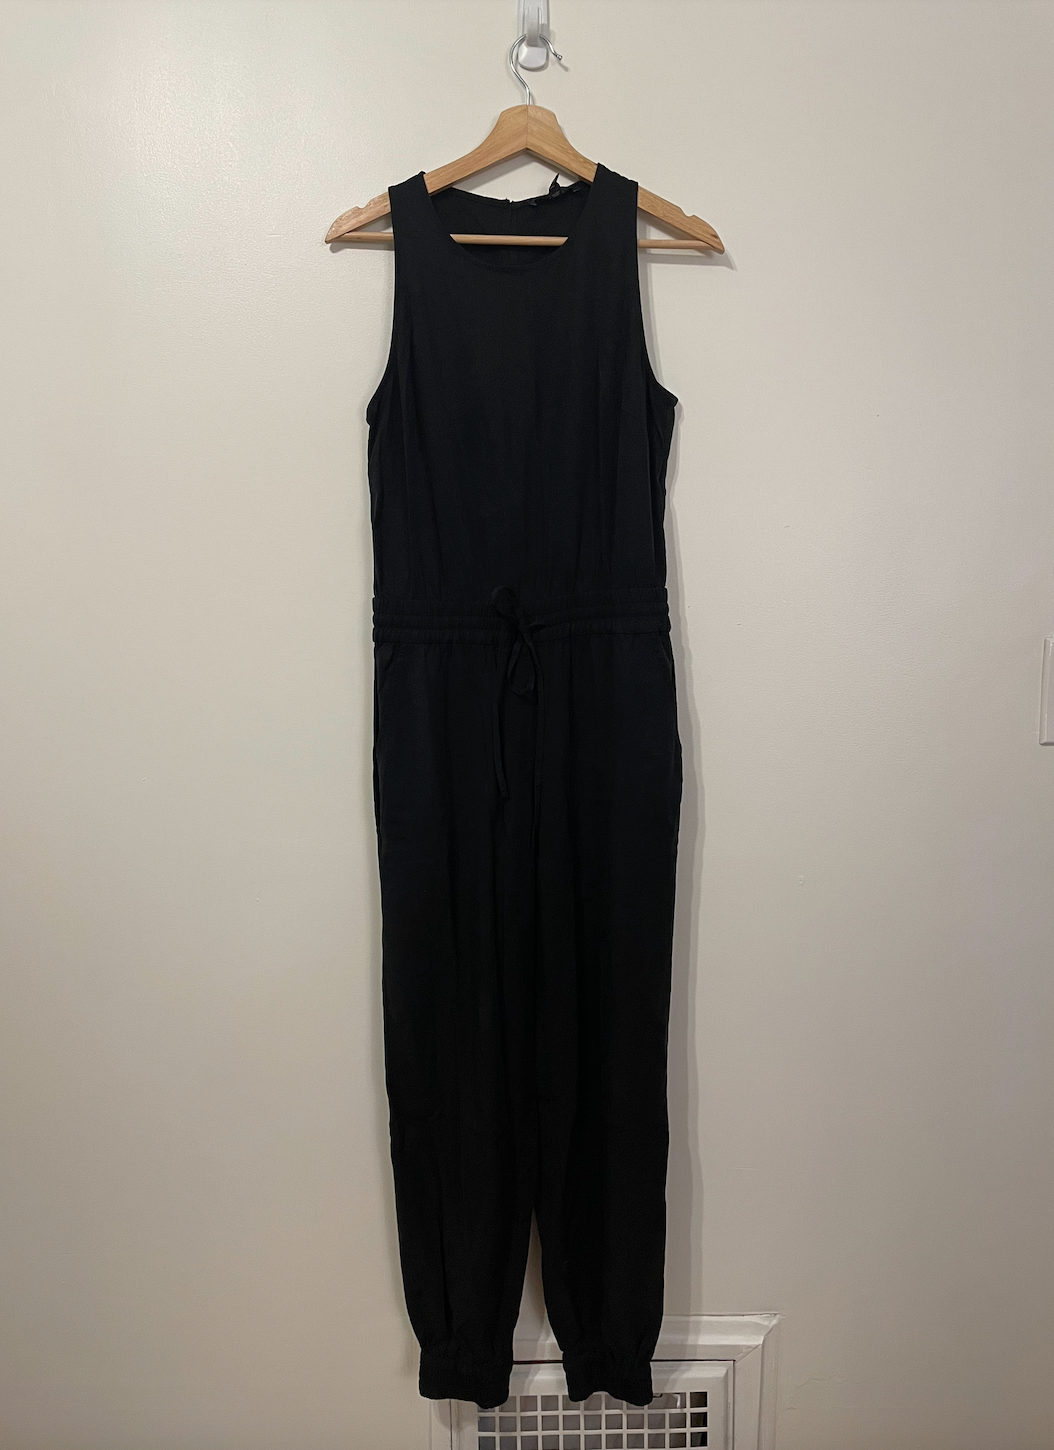 New with tags - Banana Republic black jumpsuit - women's size 2 - casual, elastic around ankles - sleeveless